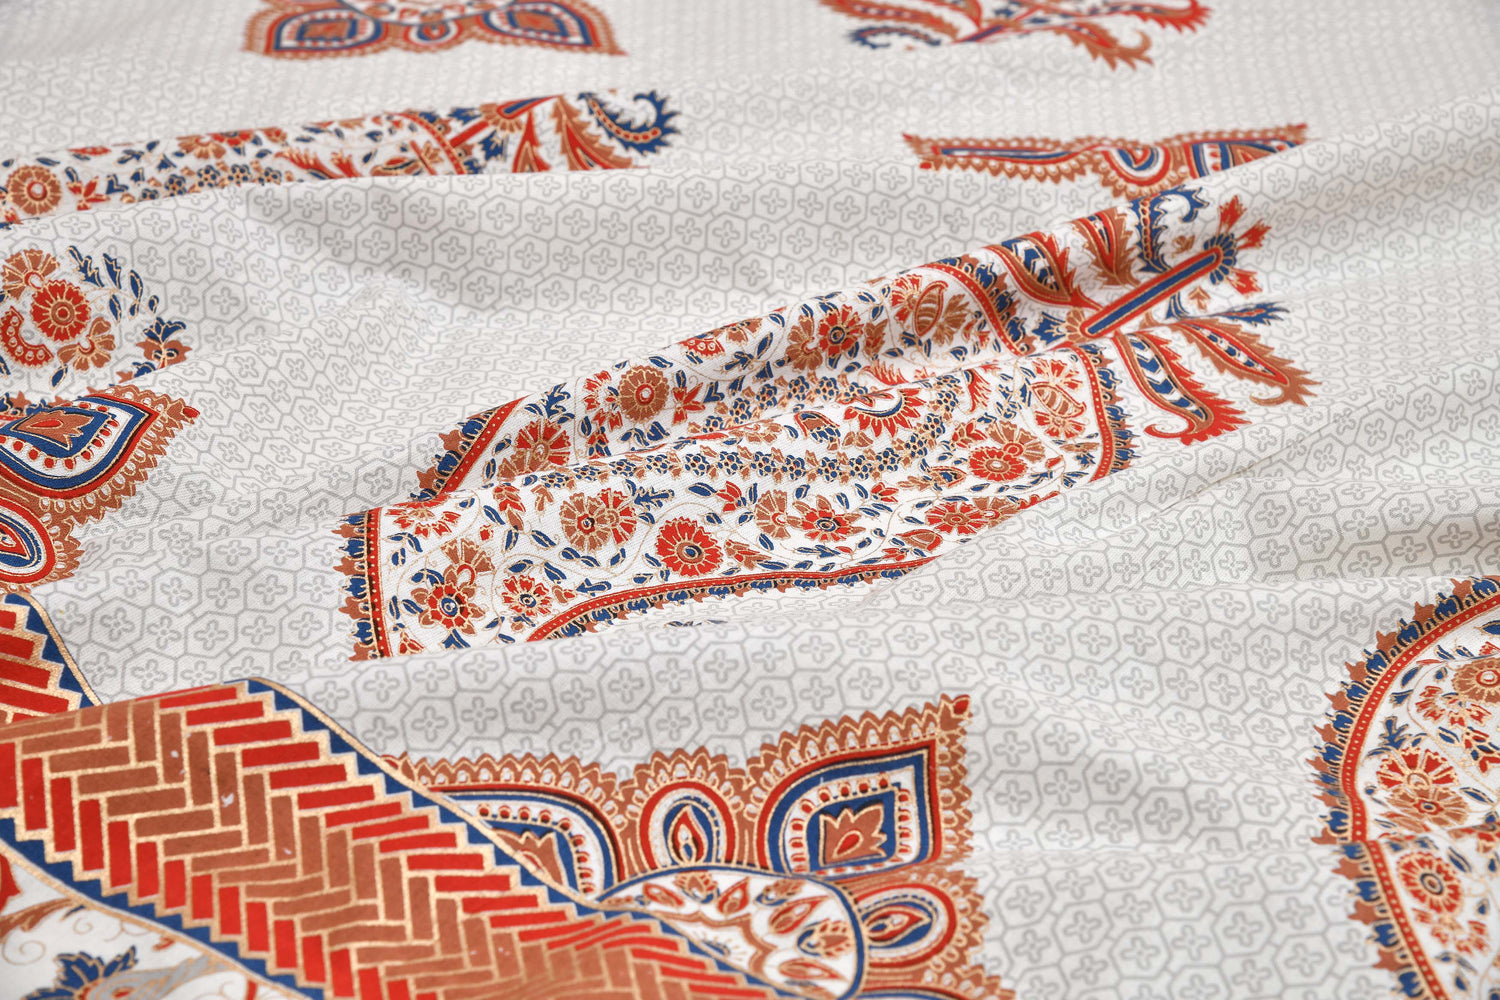 Ethnic Prints Bedsheet- Double Bed -Golden Blue Paisely